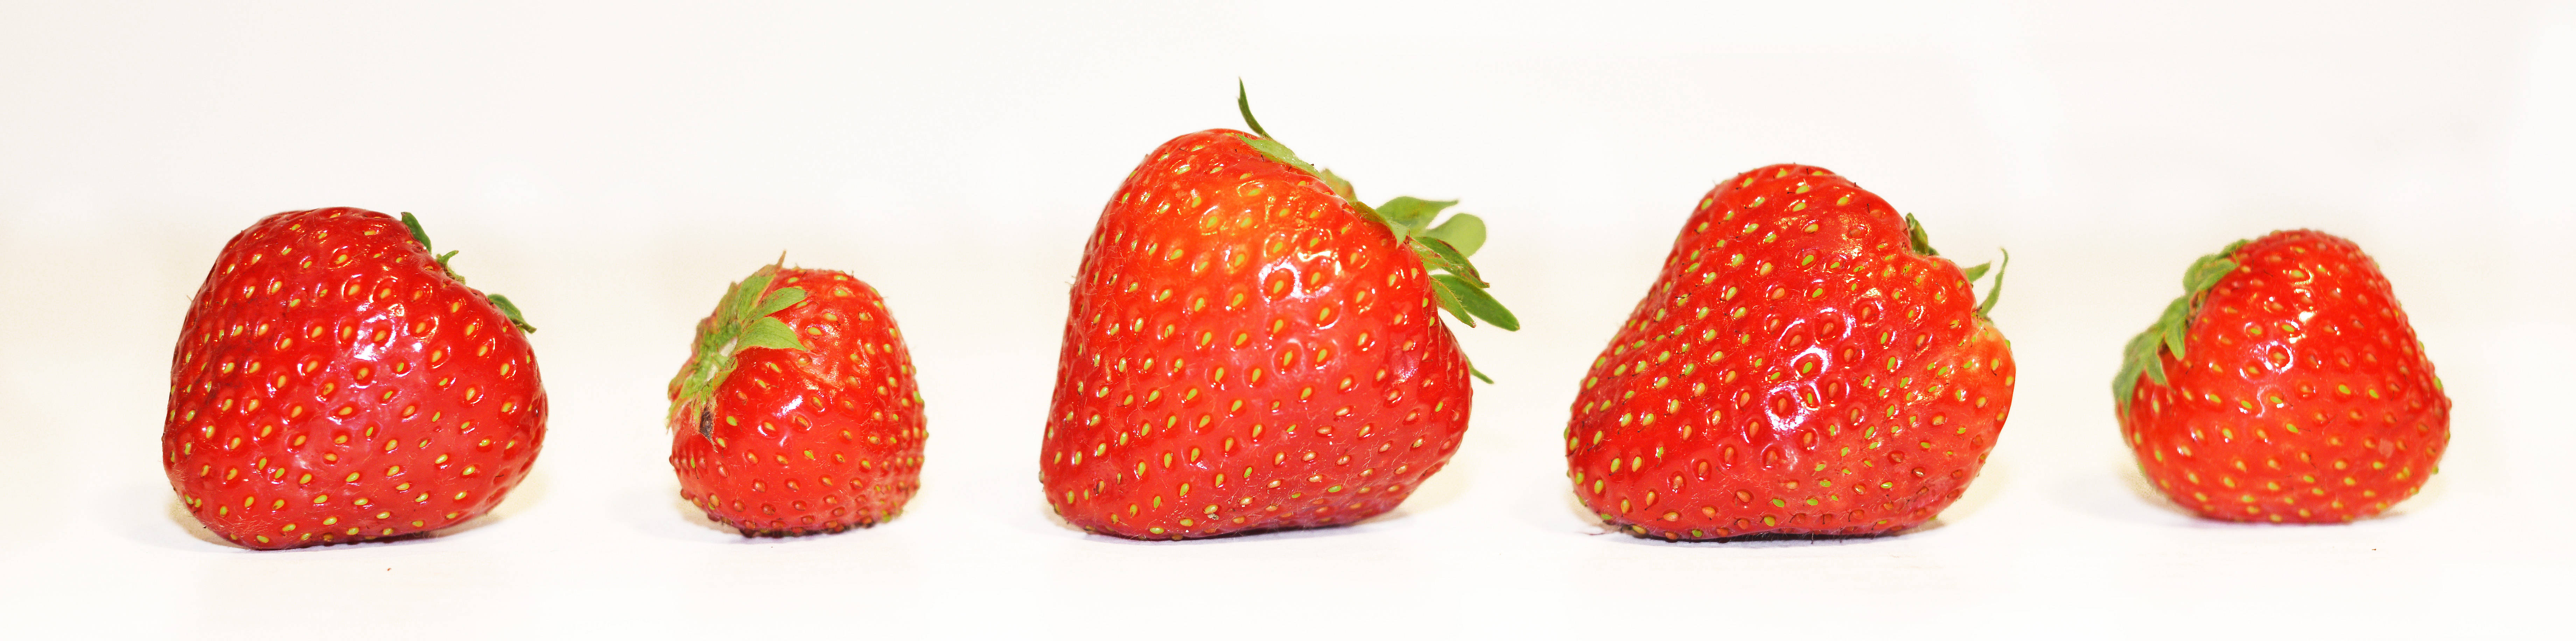 Strawberry 7360X1832 Wallpaper and Background Image